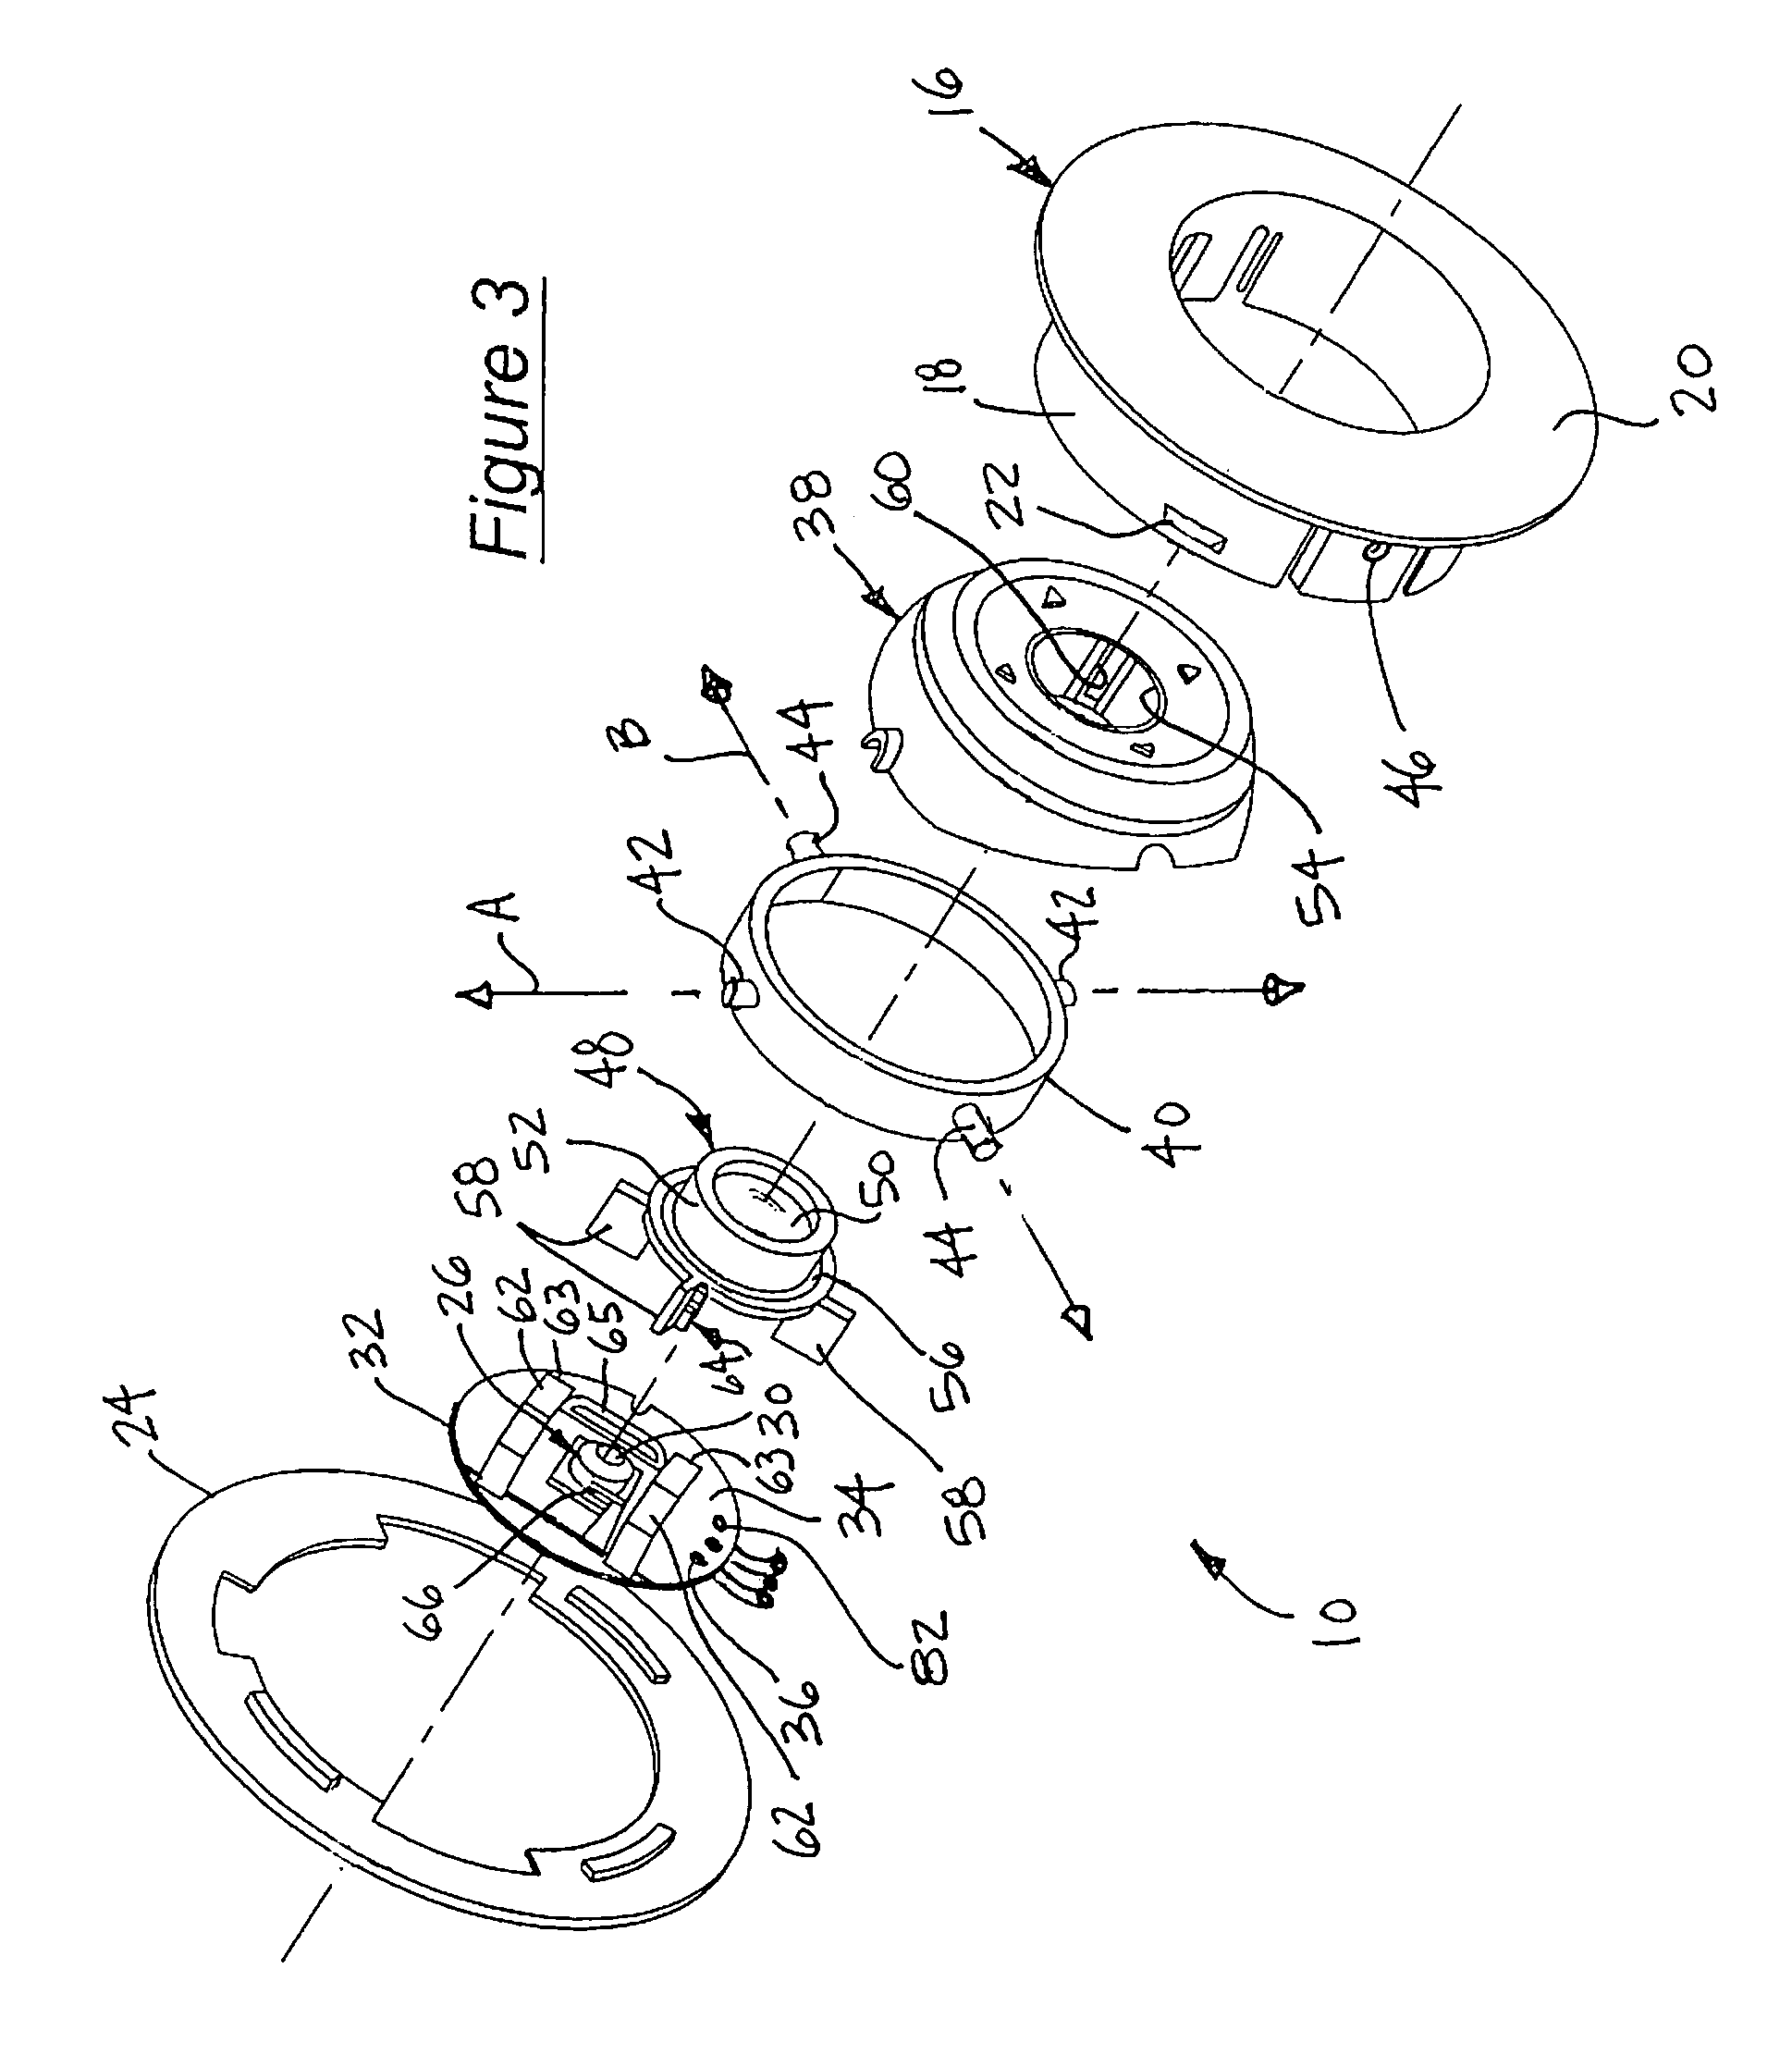 Lamp assembly having variable focus and directionality